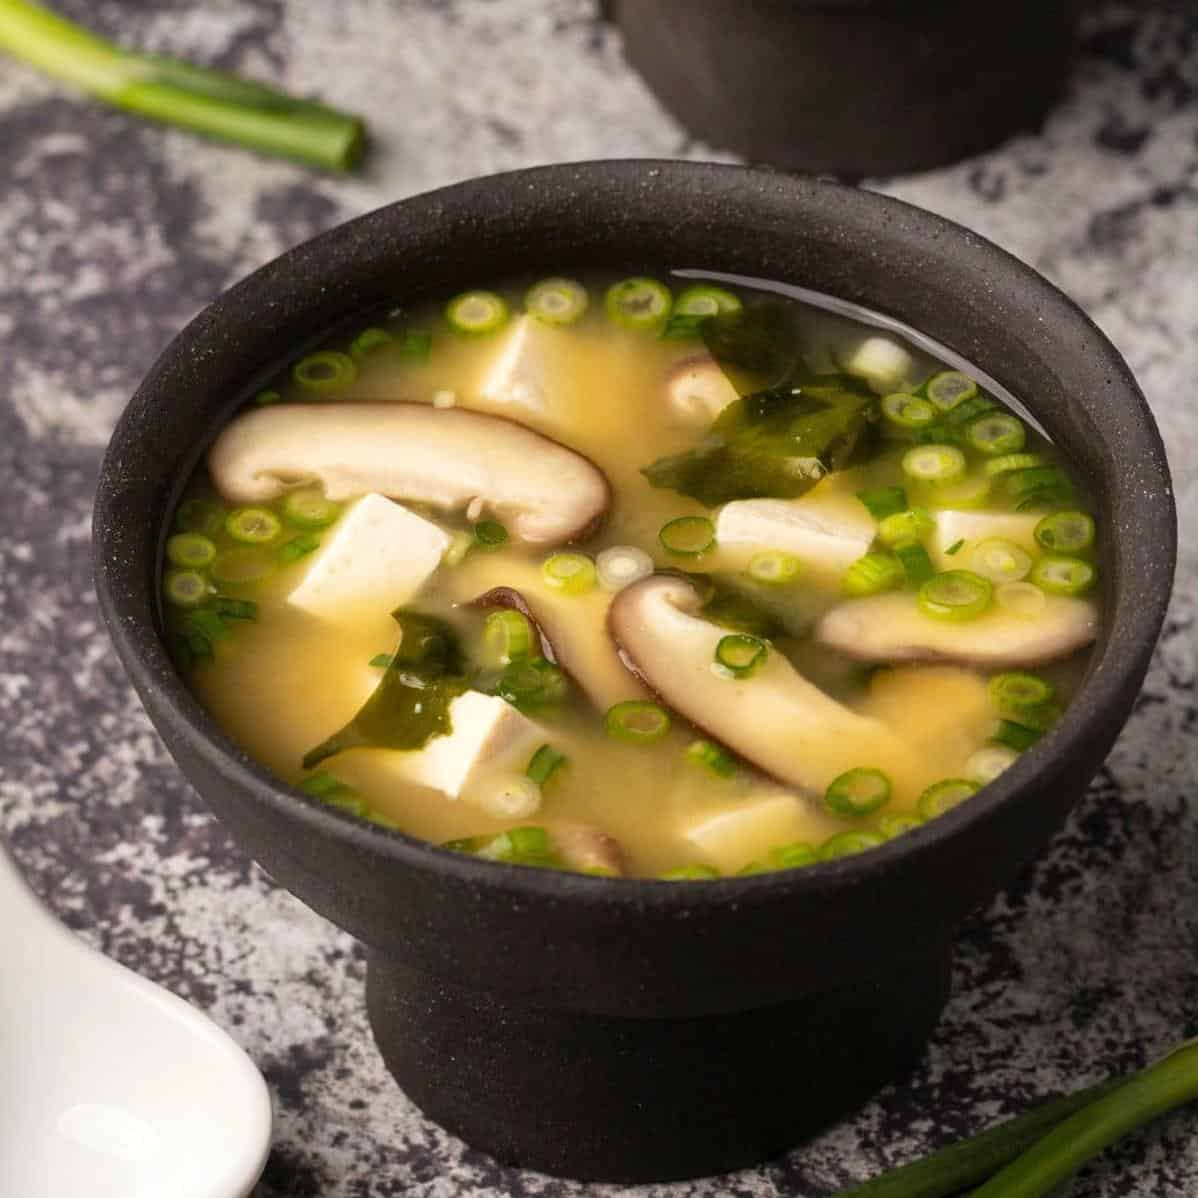  This soup is so easy to prepare, making it the perfect weeknight meal or weekend lunch.